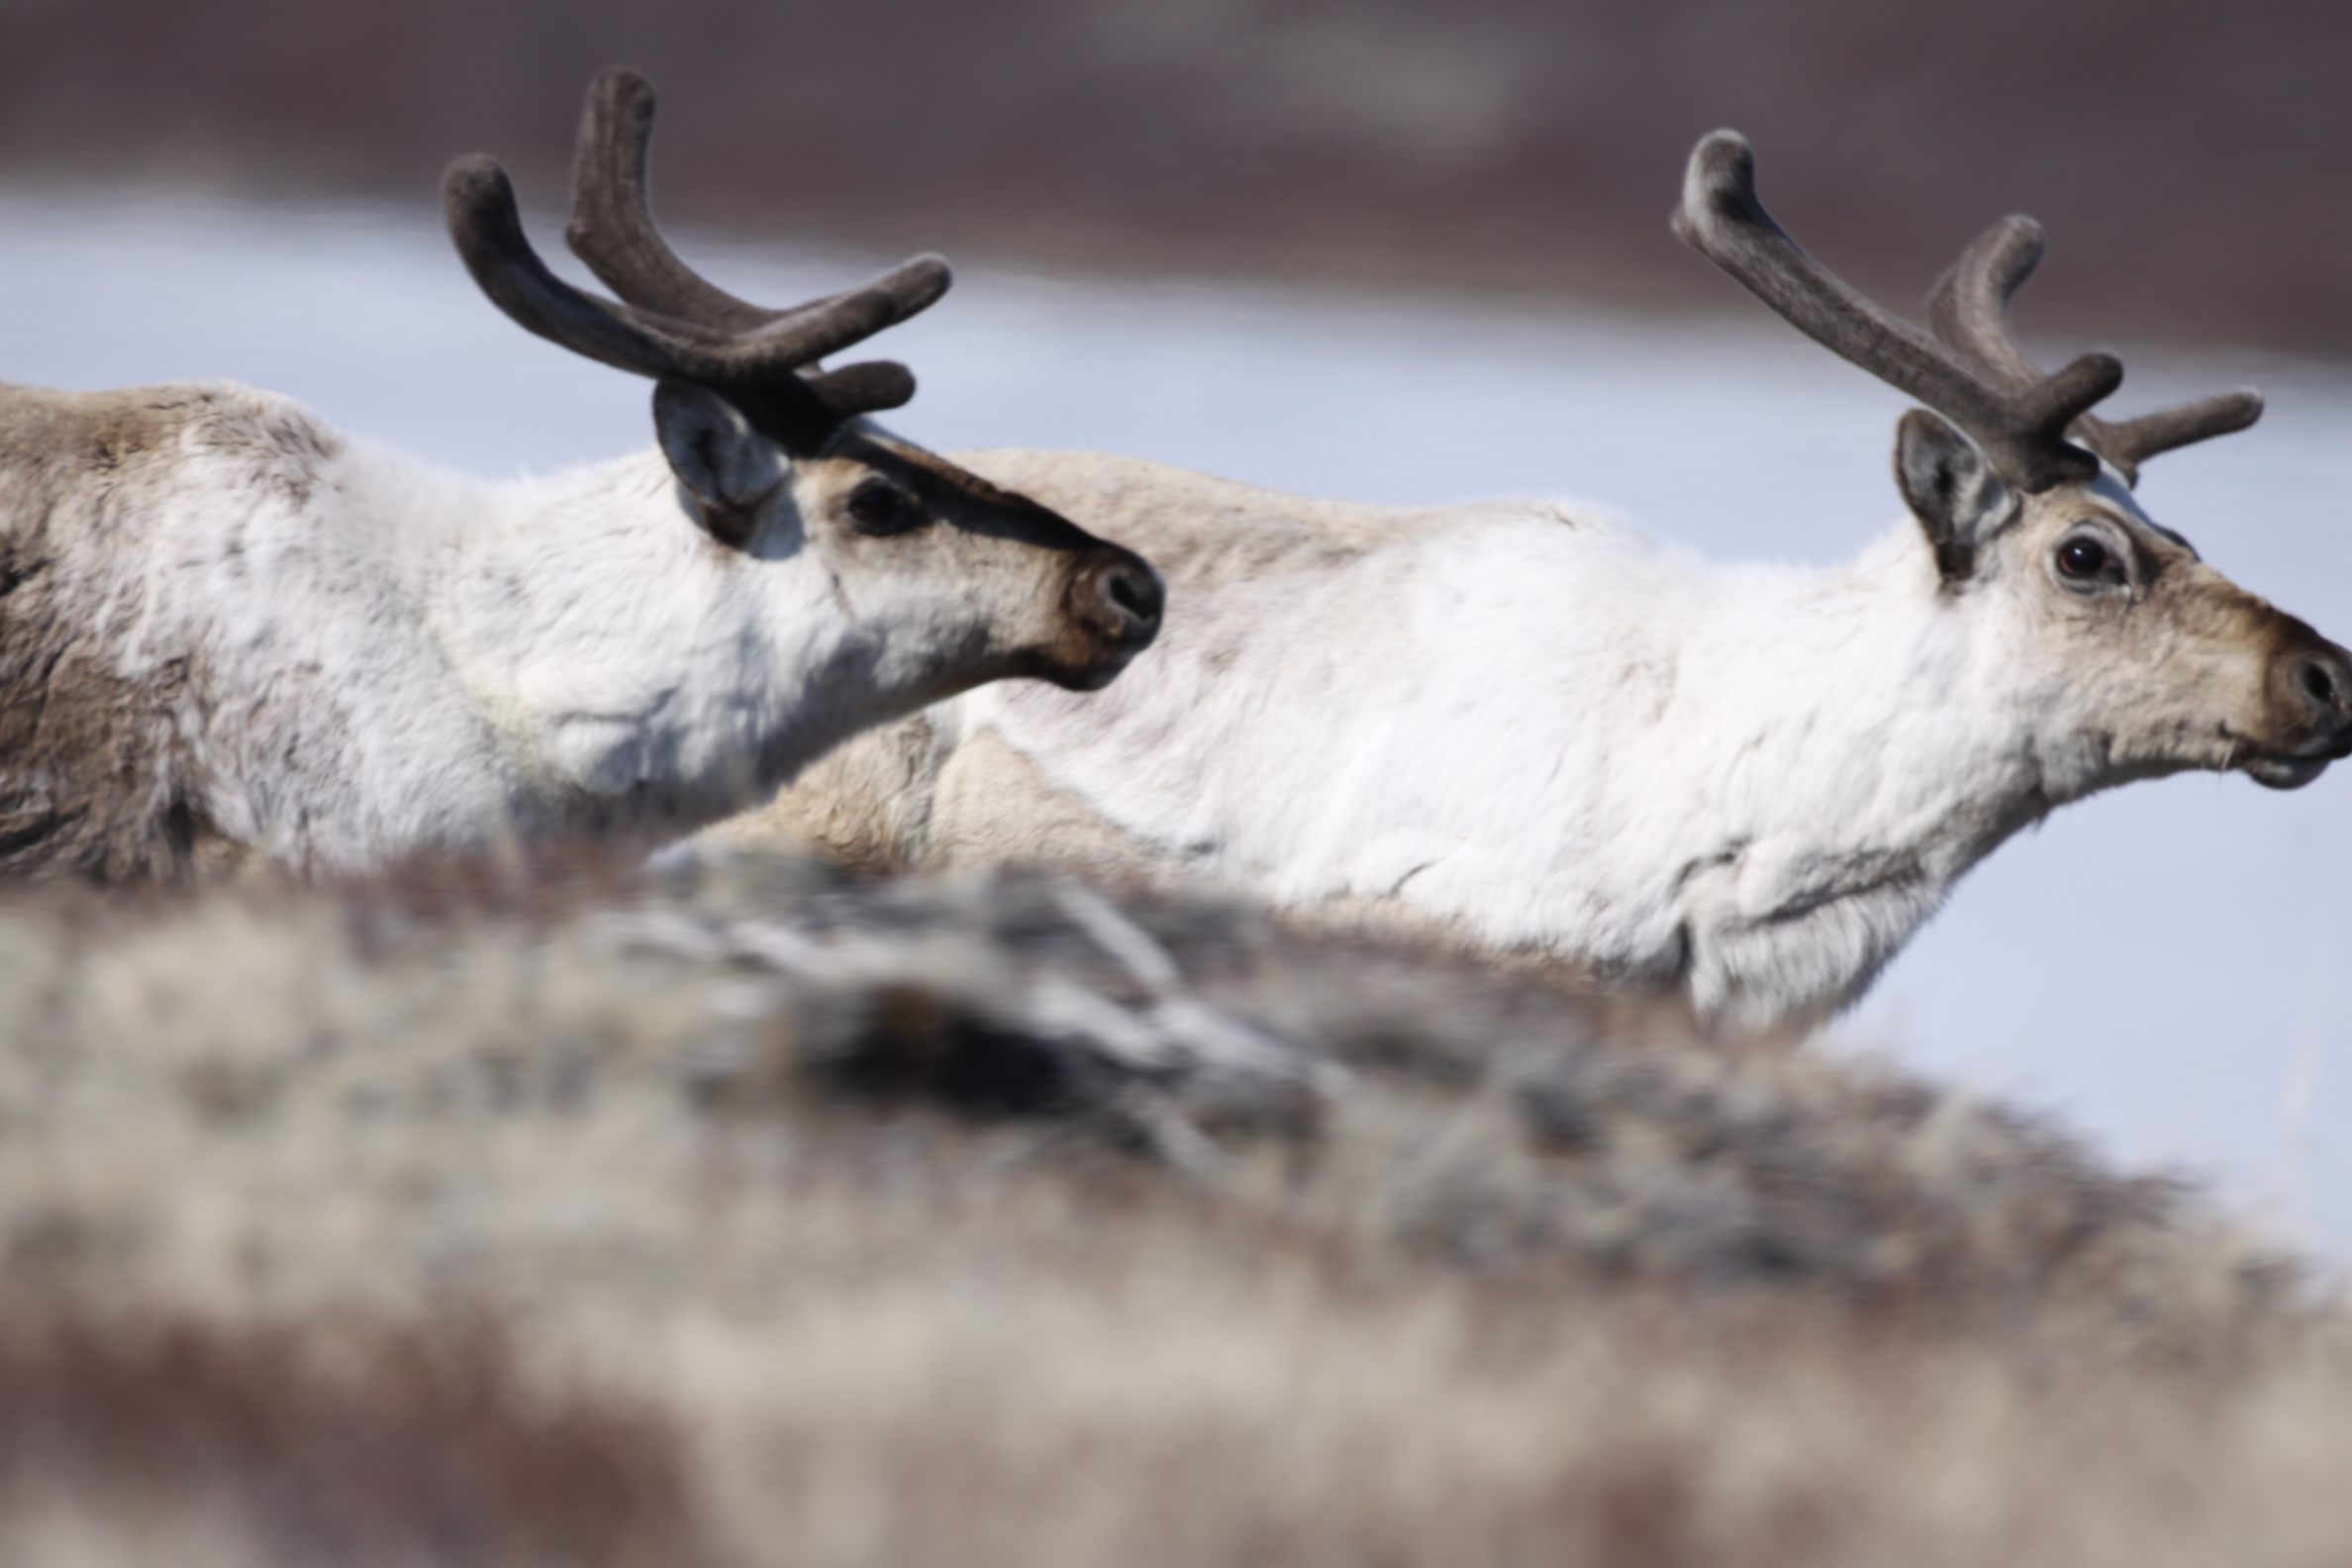 A herd of caribou in arctic Greenland. Caribou at this study site have been declining over the past several years, while musk oxen have been increasing. Such herbivores help rare plant species persist in a rapidly changing climate. (Eric Post/UC Davis)